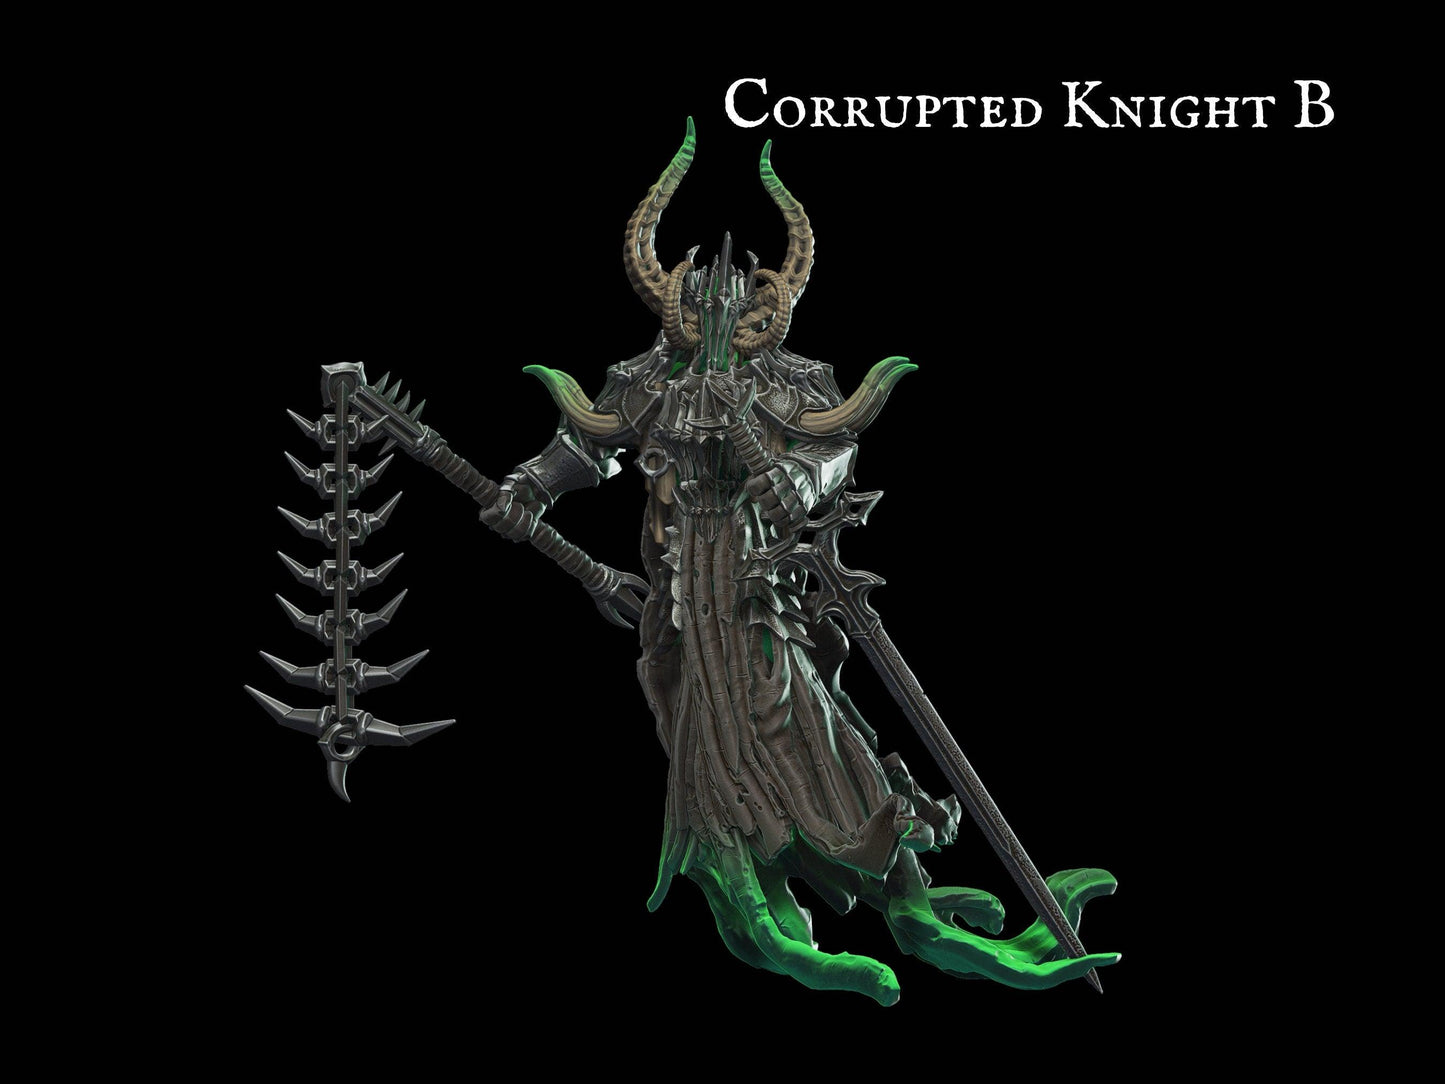 DnD Corrupted Knight Miniature - 28mm scale Tabletop gaming DnD Miniature Dungeons and Dragons,ttrpg dnd 5e dungeon master gift - Plague Miniatures shop for DnD Miniatures